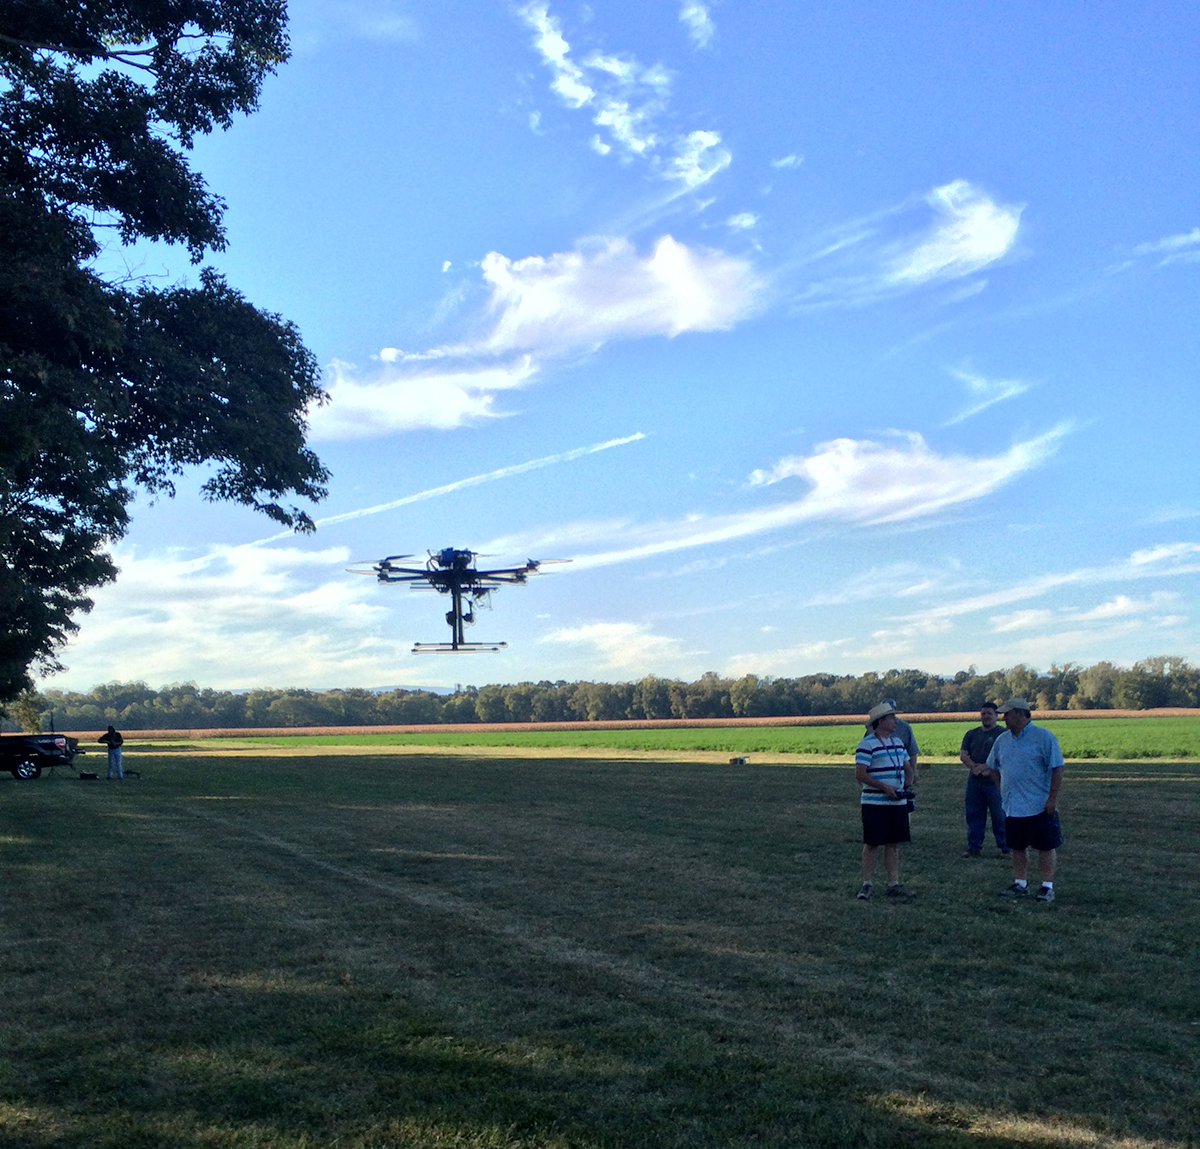 DC drone hobbyists in limbo over flying locations